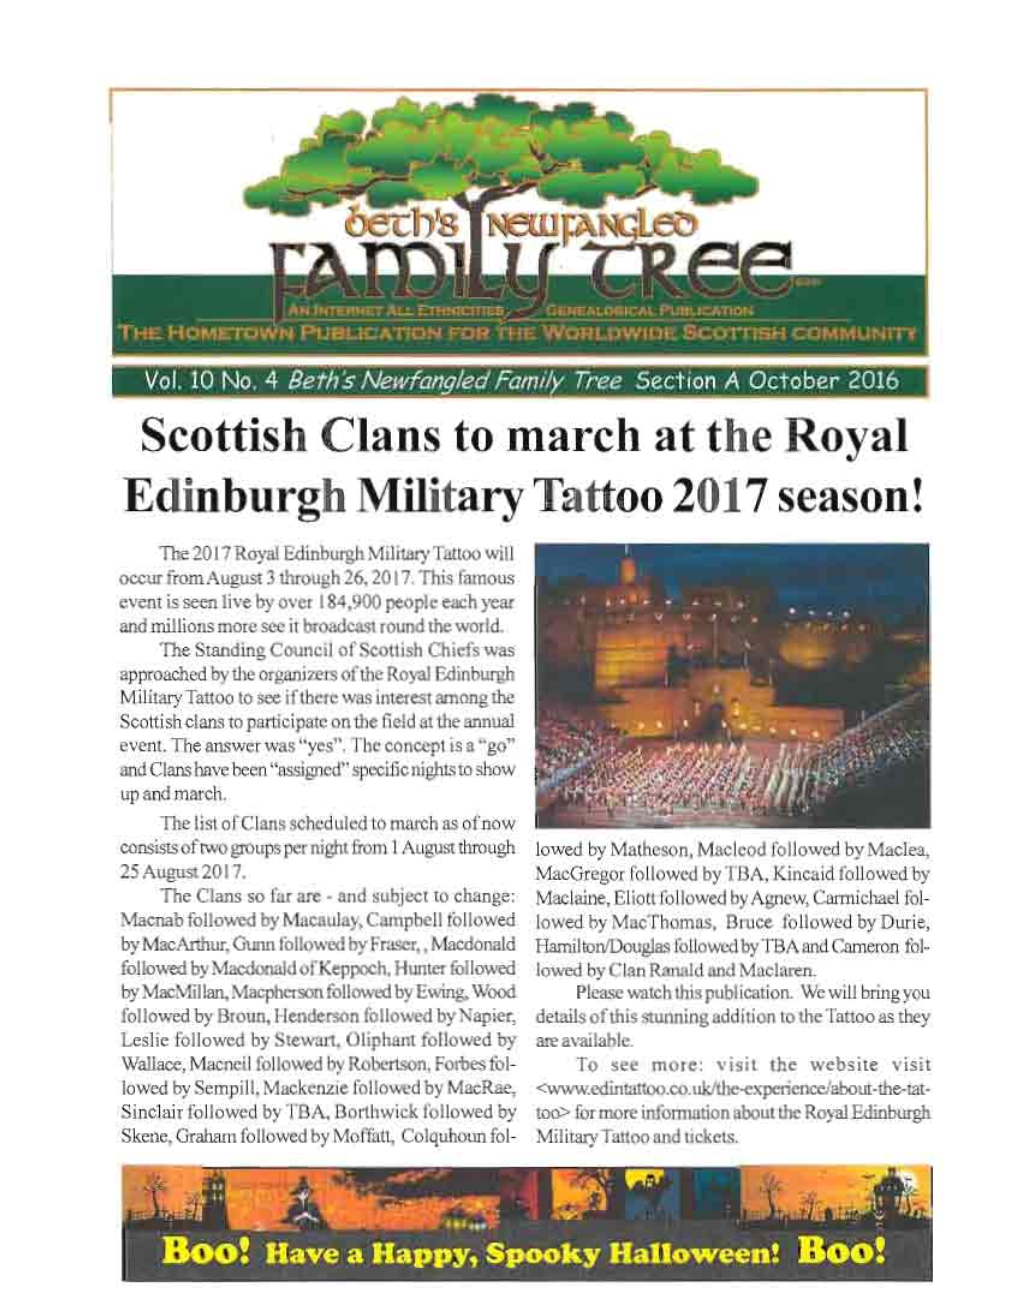 Scottish Clans to March at the Roval Edinburgh Military Thttoo 2017 Season!